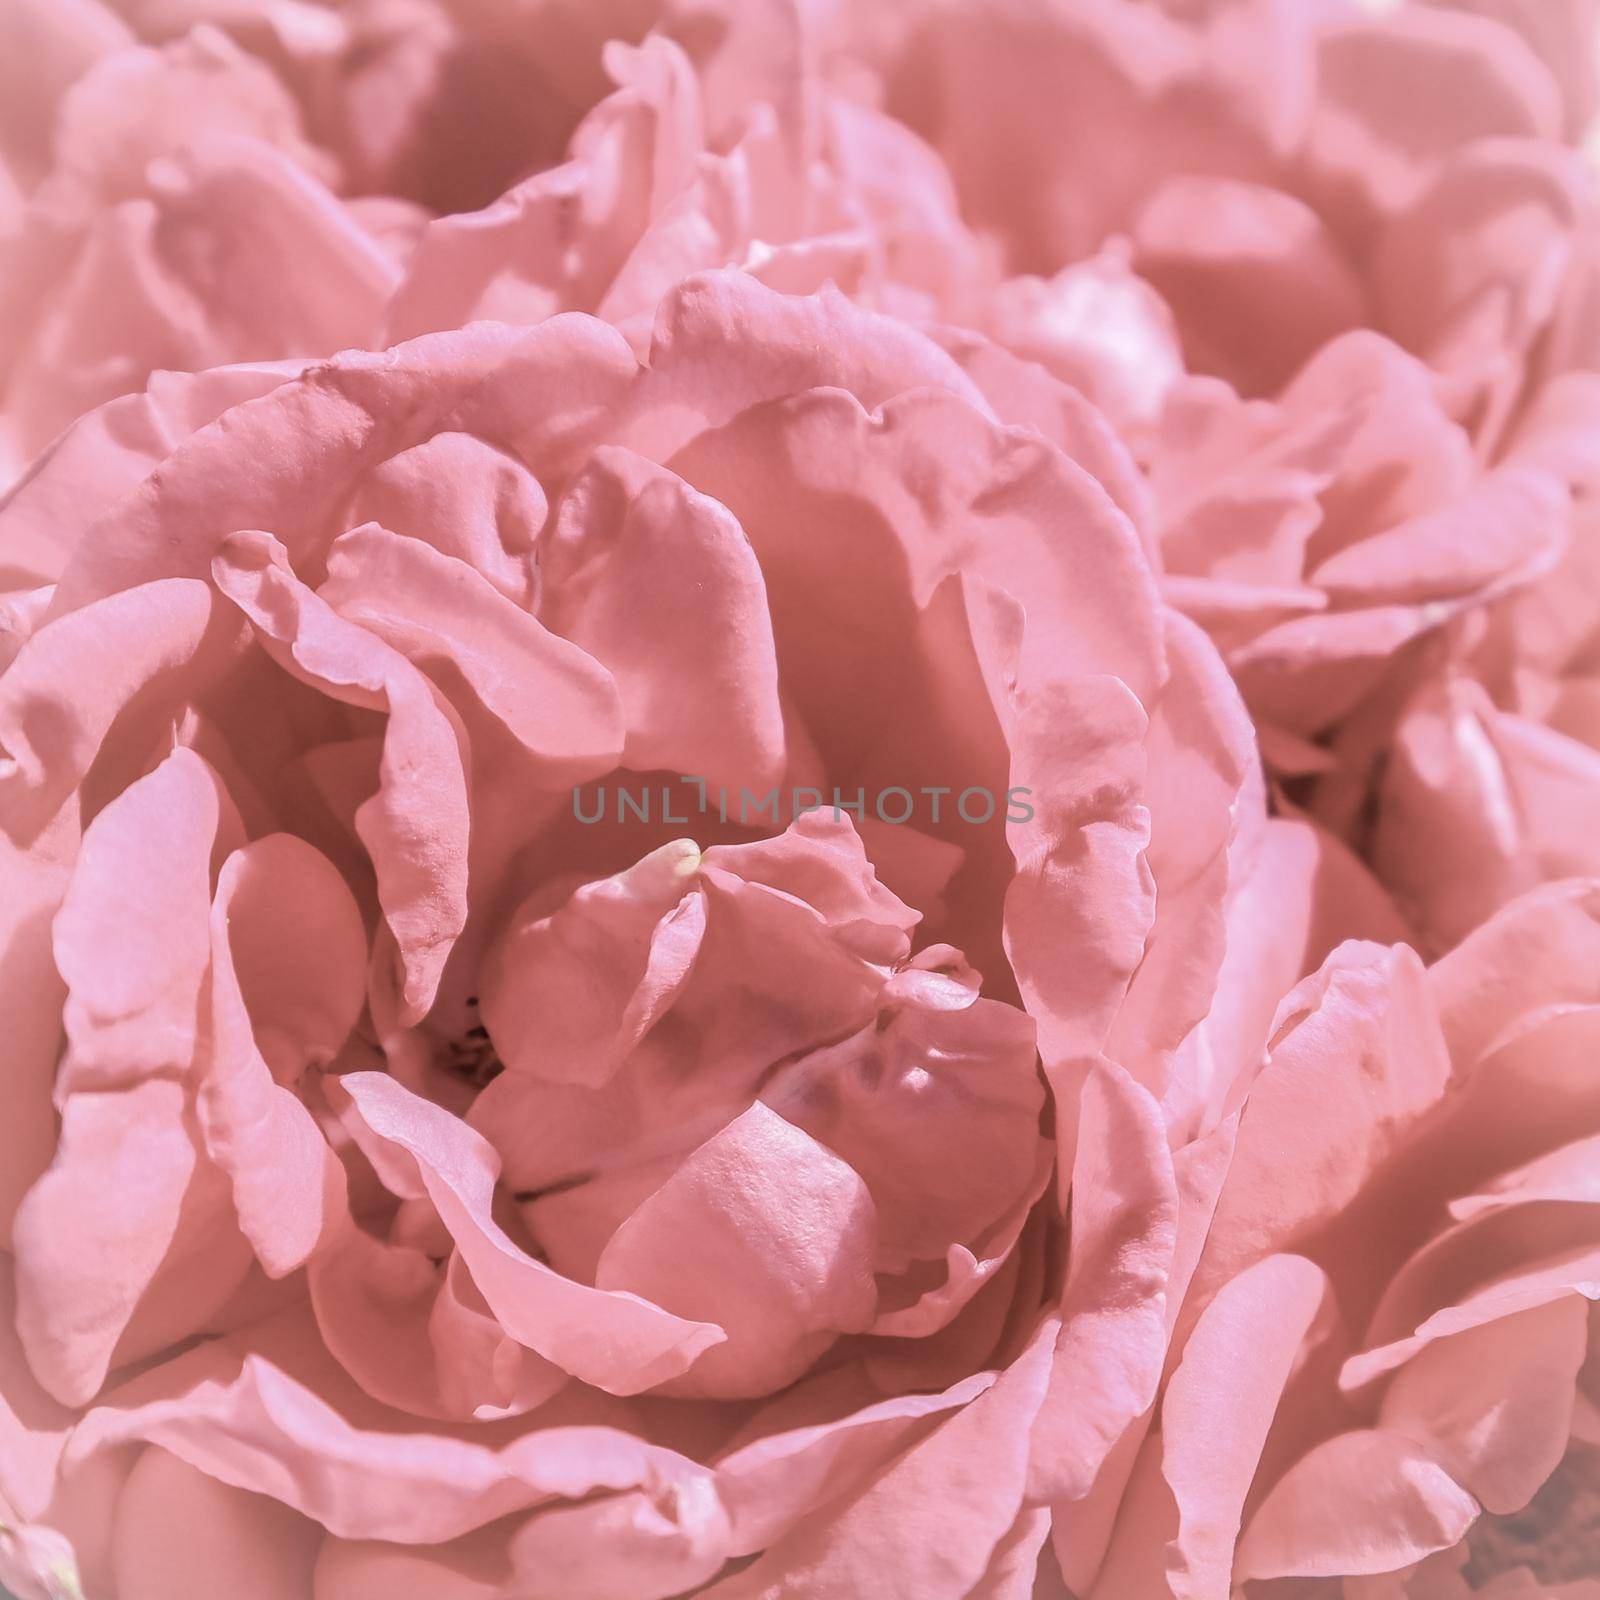 Background of beautiful pink roses. Ideal for greeting cards for wedding, birthday, Valentine's Day, Mother's Day. by Olayola